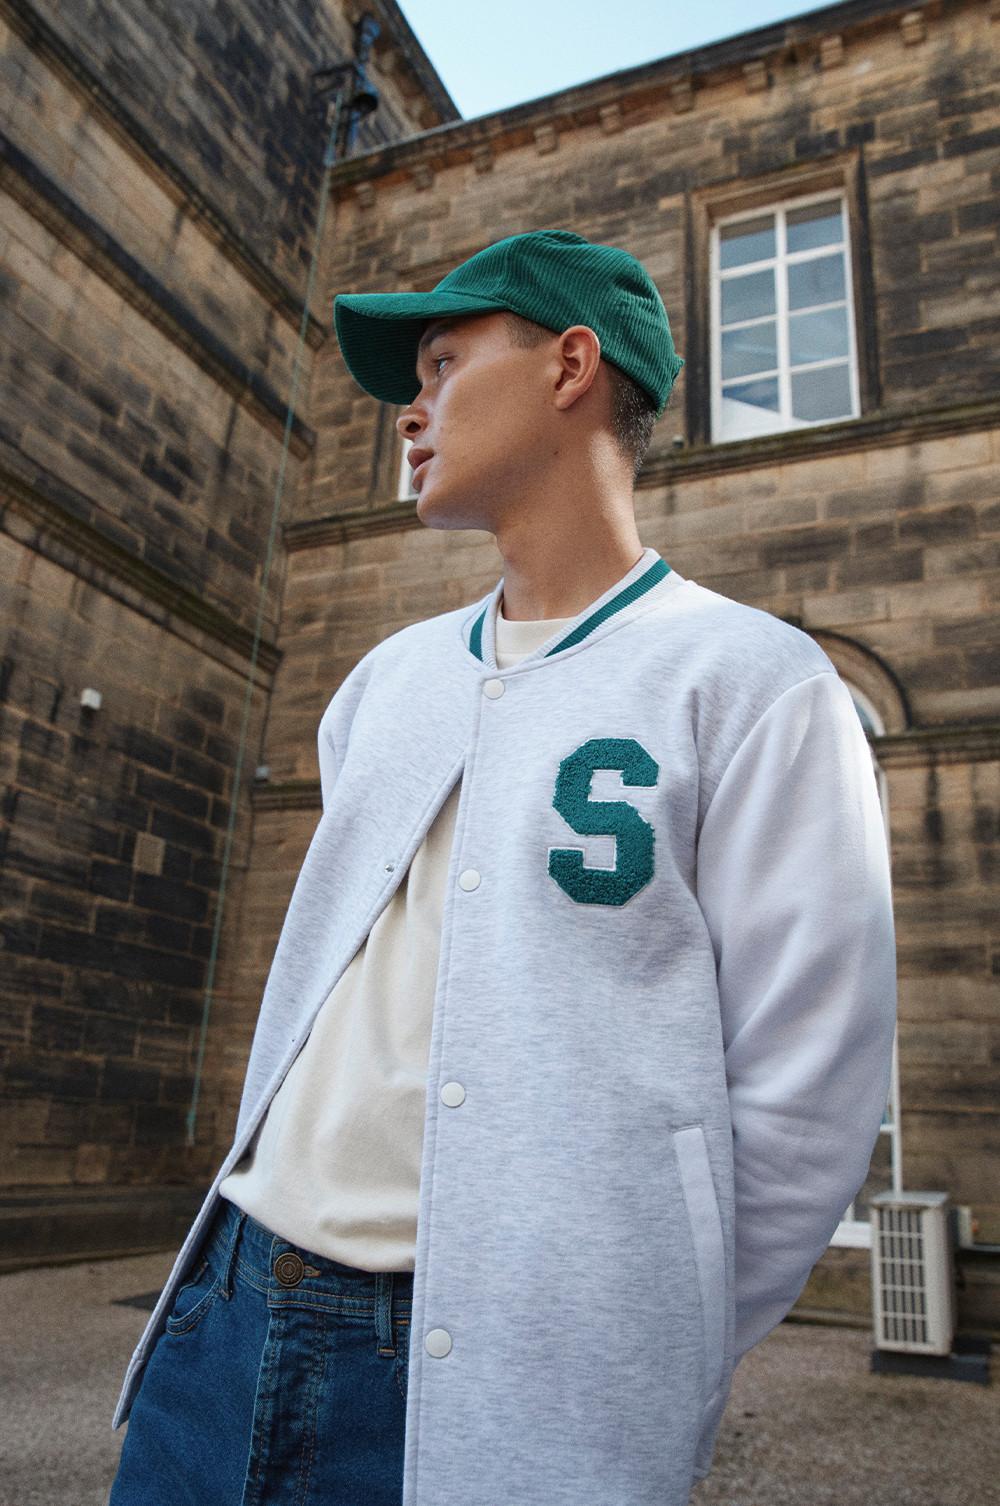 Varsity and Collegiate-Inspired Clothing & Accessories